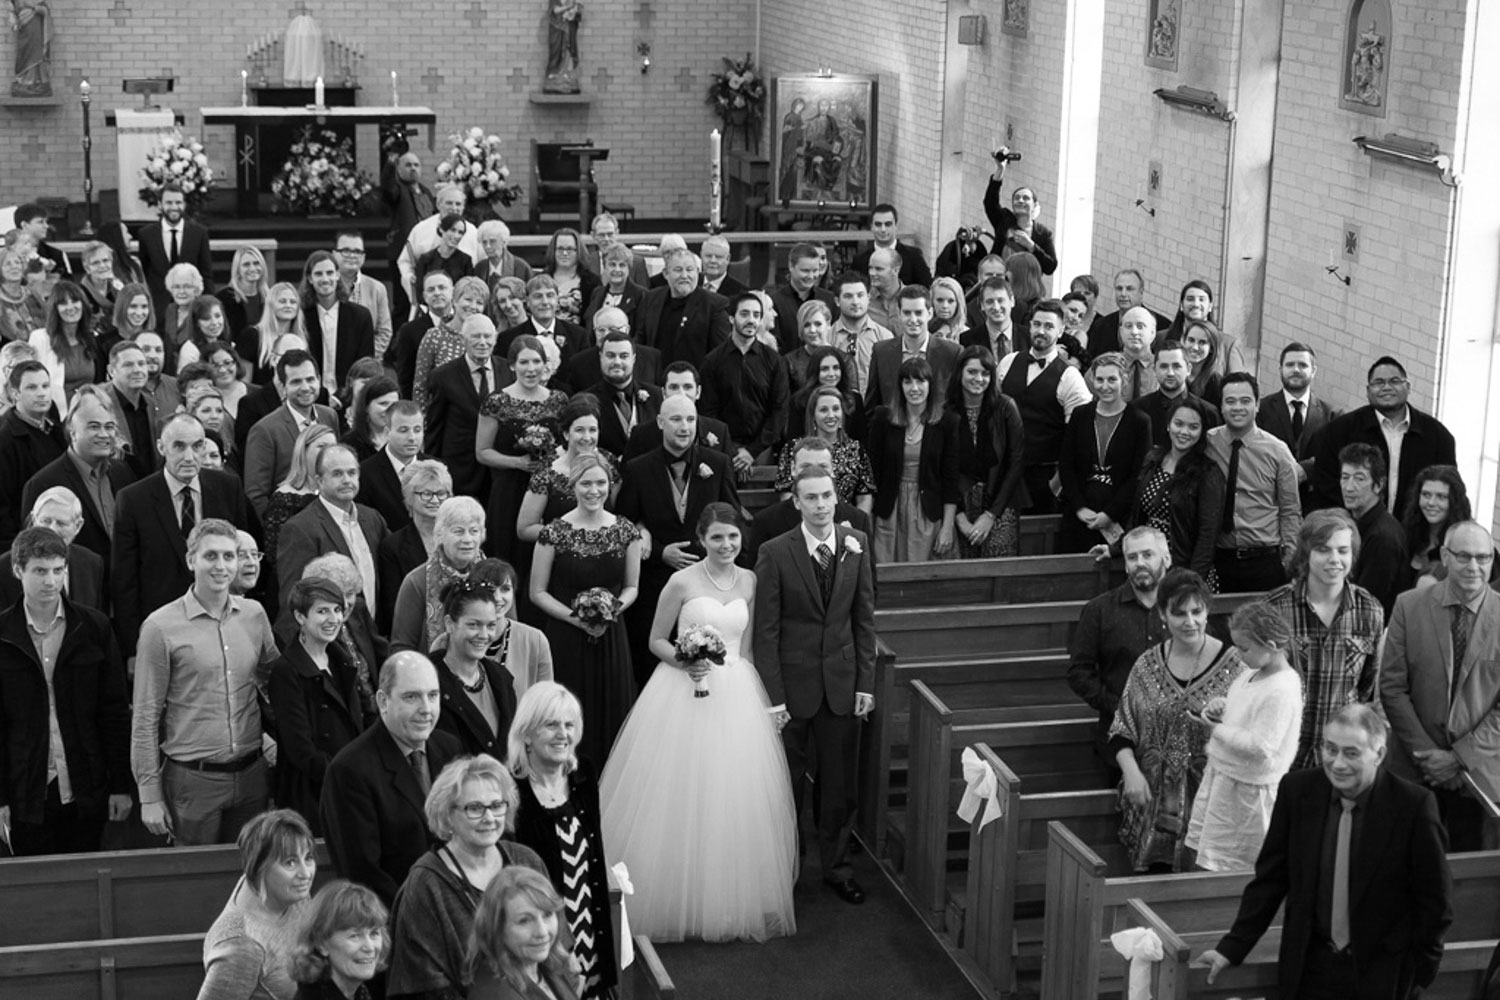 auckland city wedding group photo in church